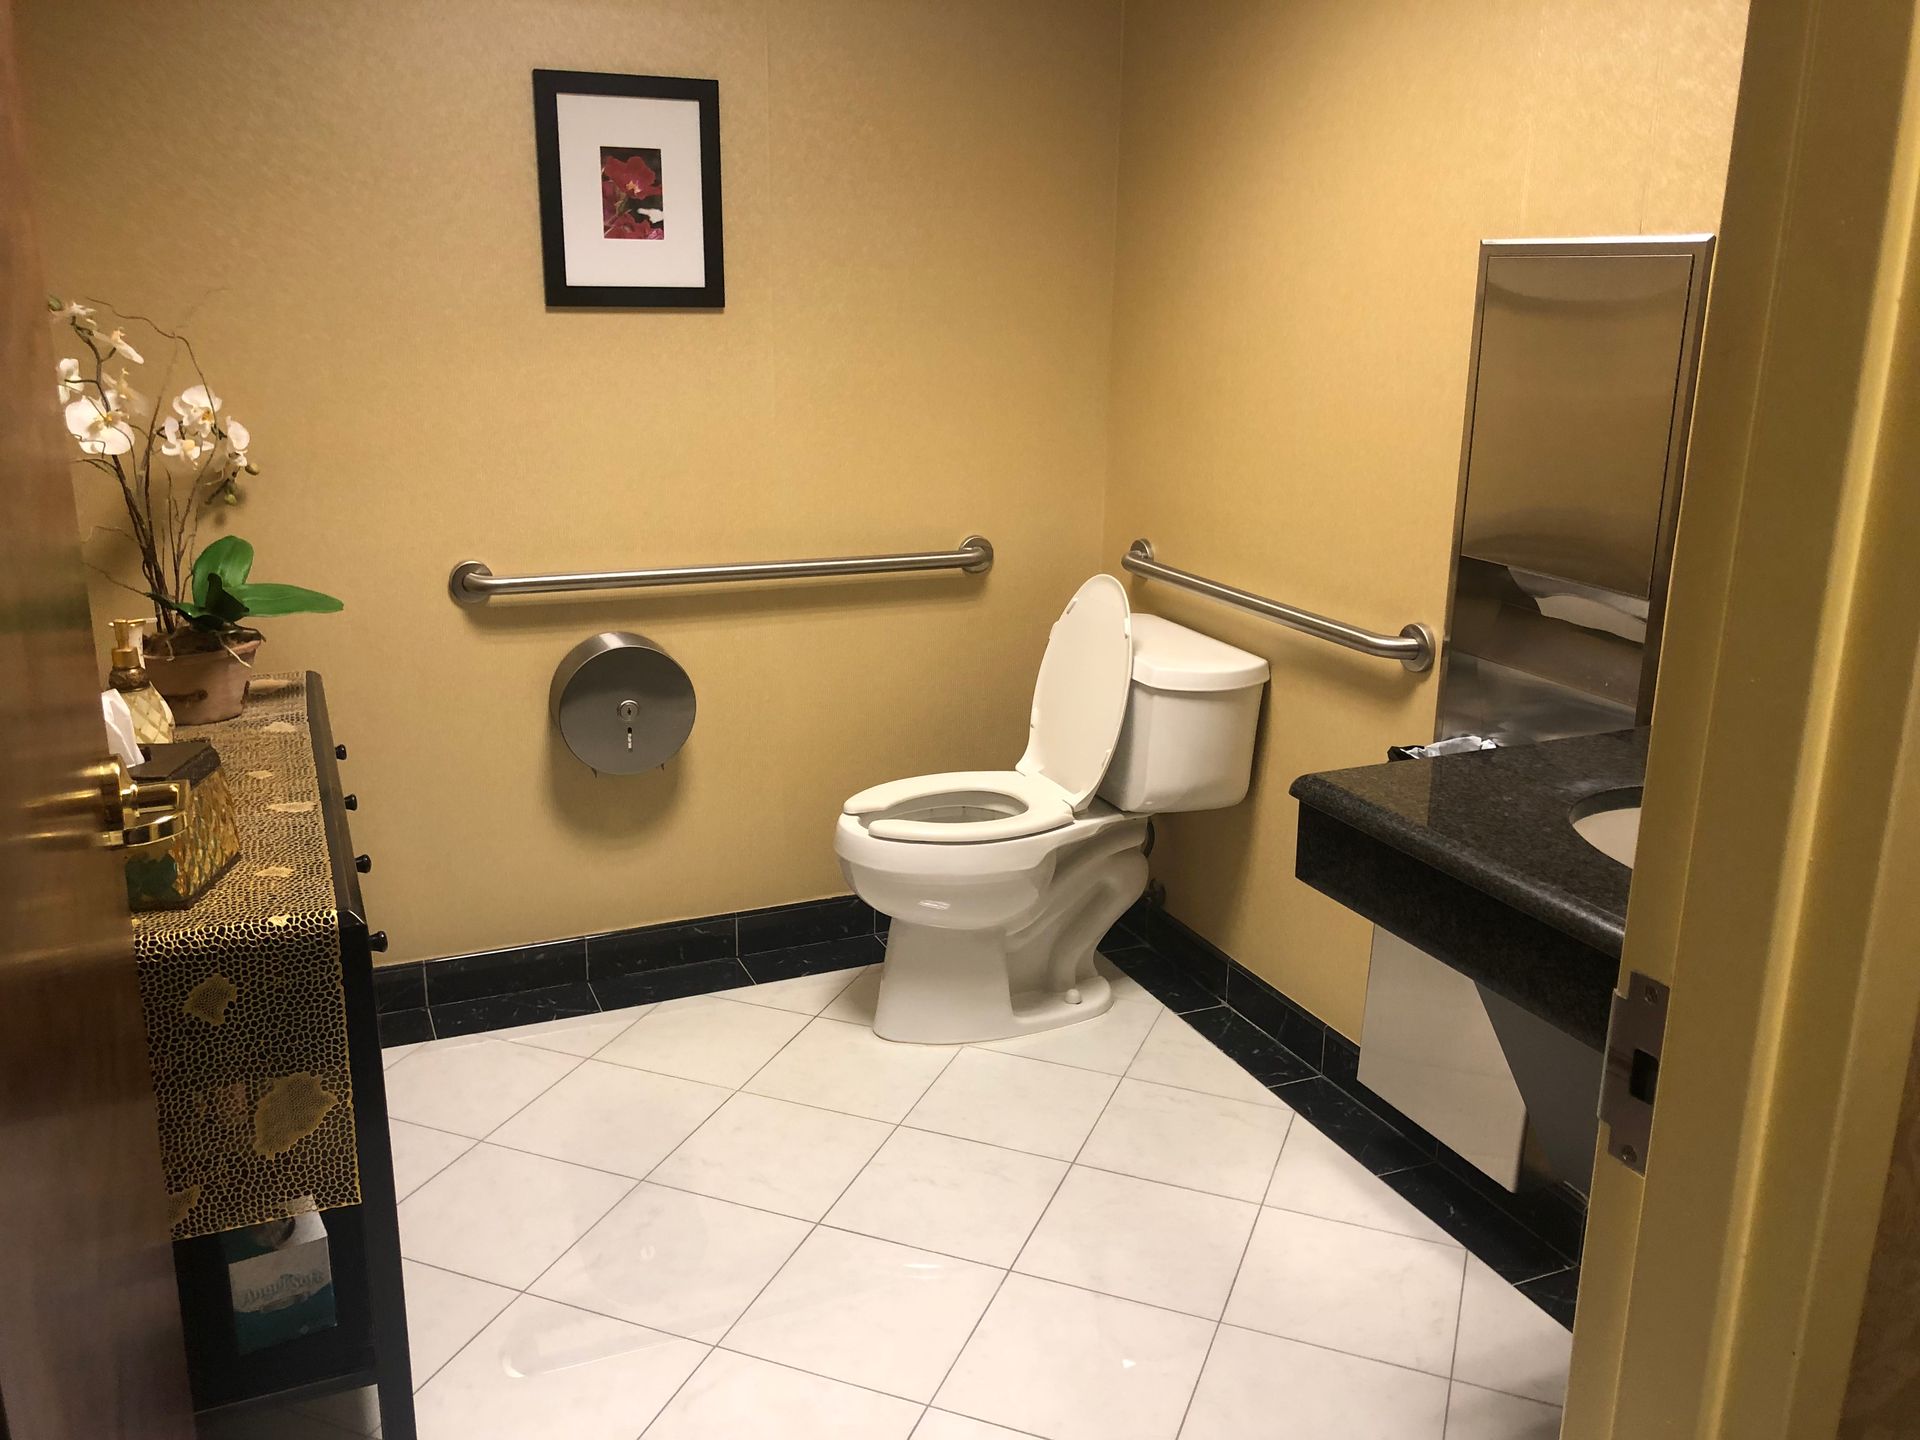 Toilet - Clifton, NJ - Evergreen Commercial Real Estate Brokers Inc